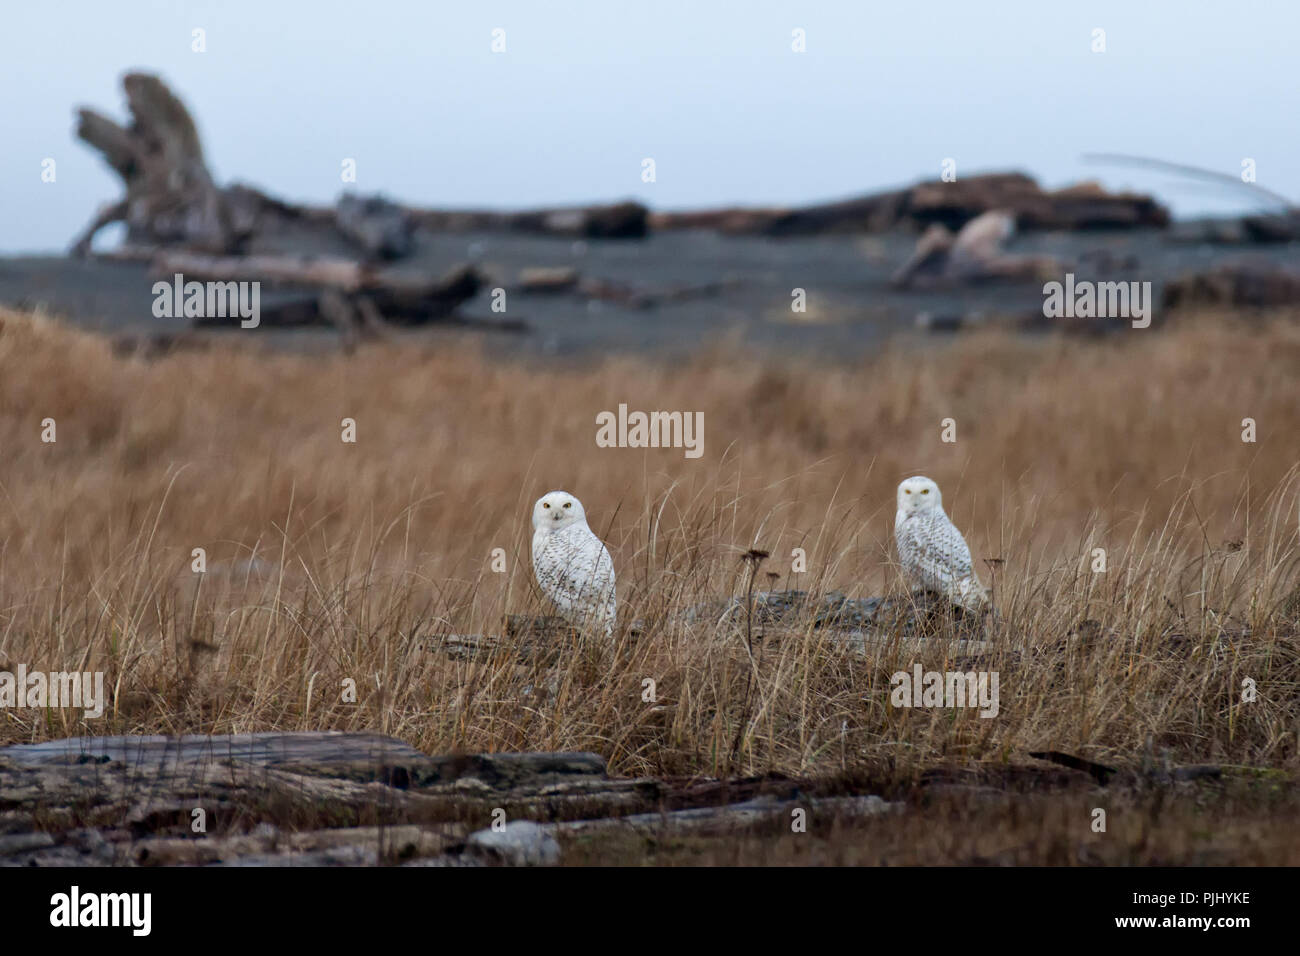 Two snowy owls on logs in the dry grass Stock Photo